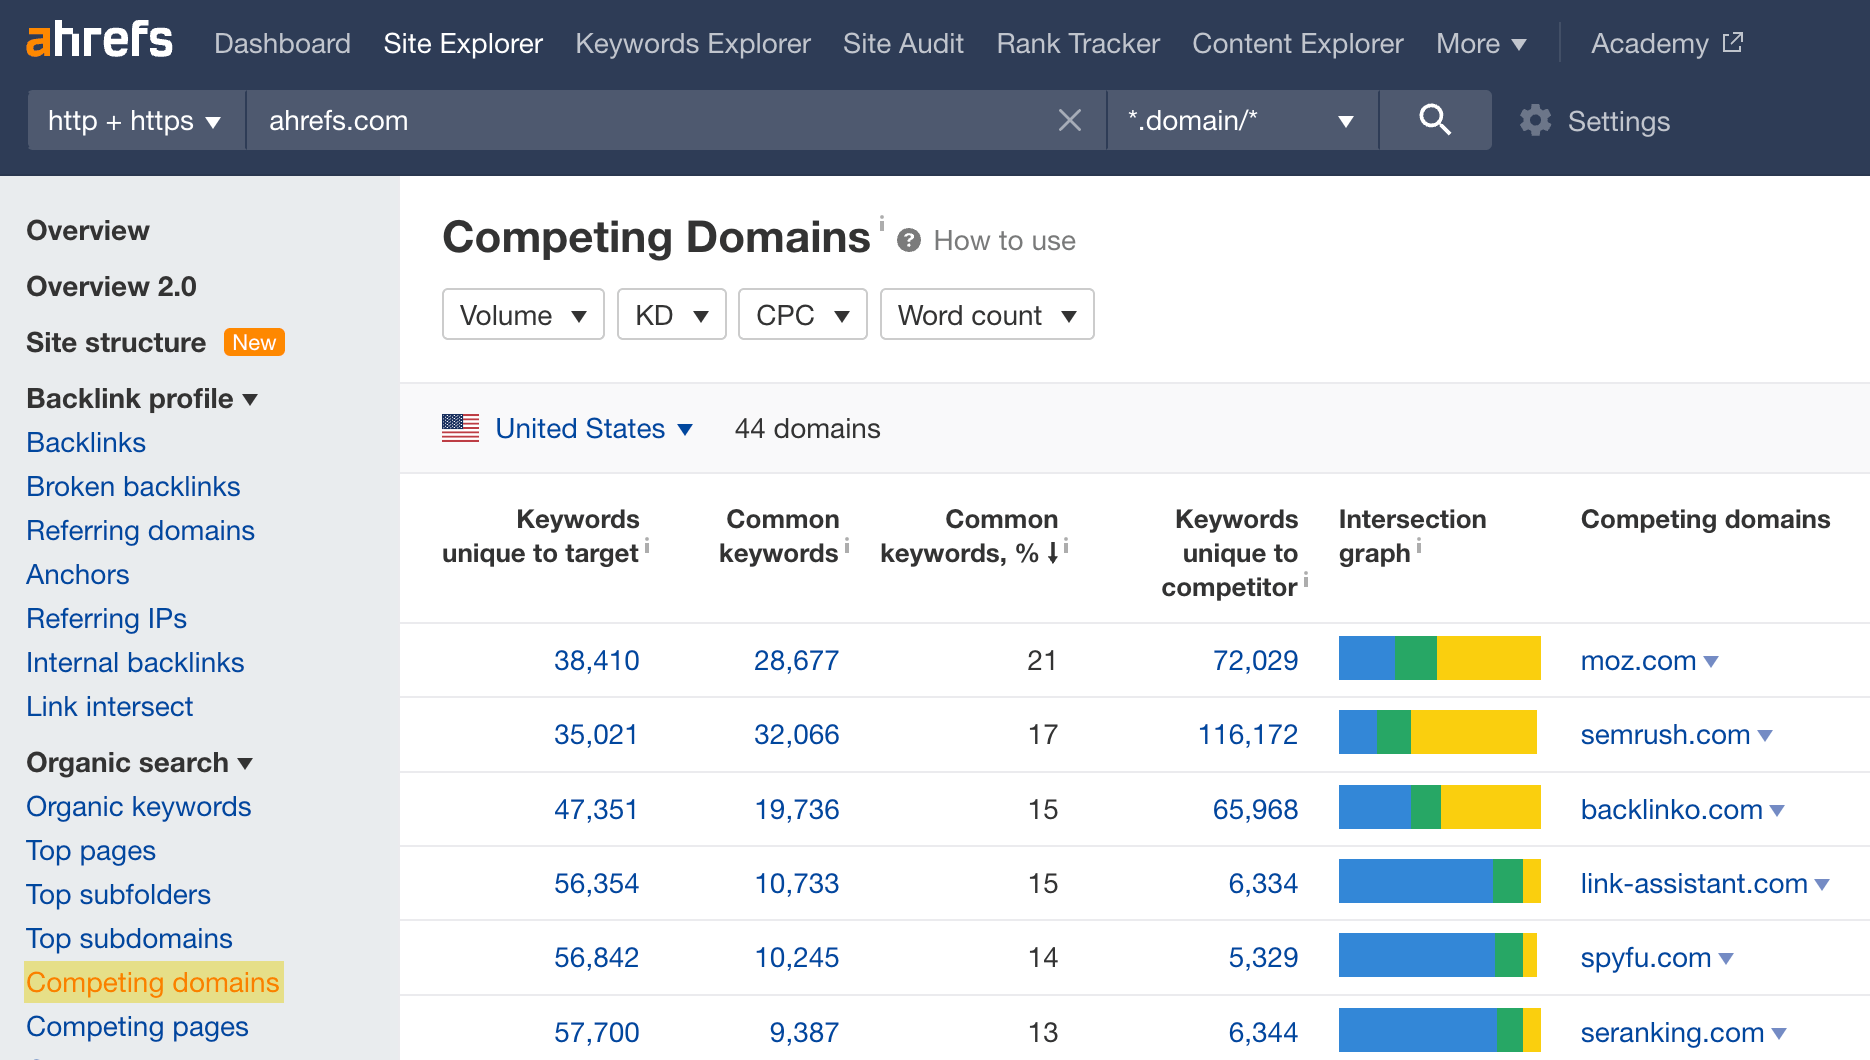 Competing Domains report in Ahrefs' Site Explorer